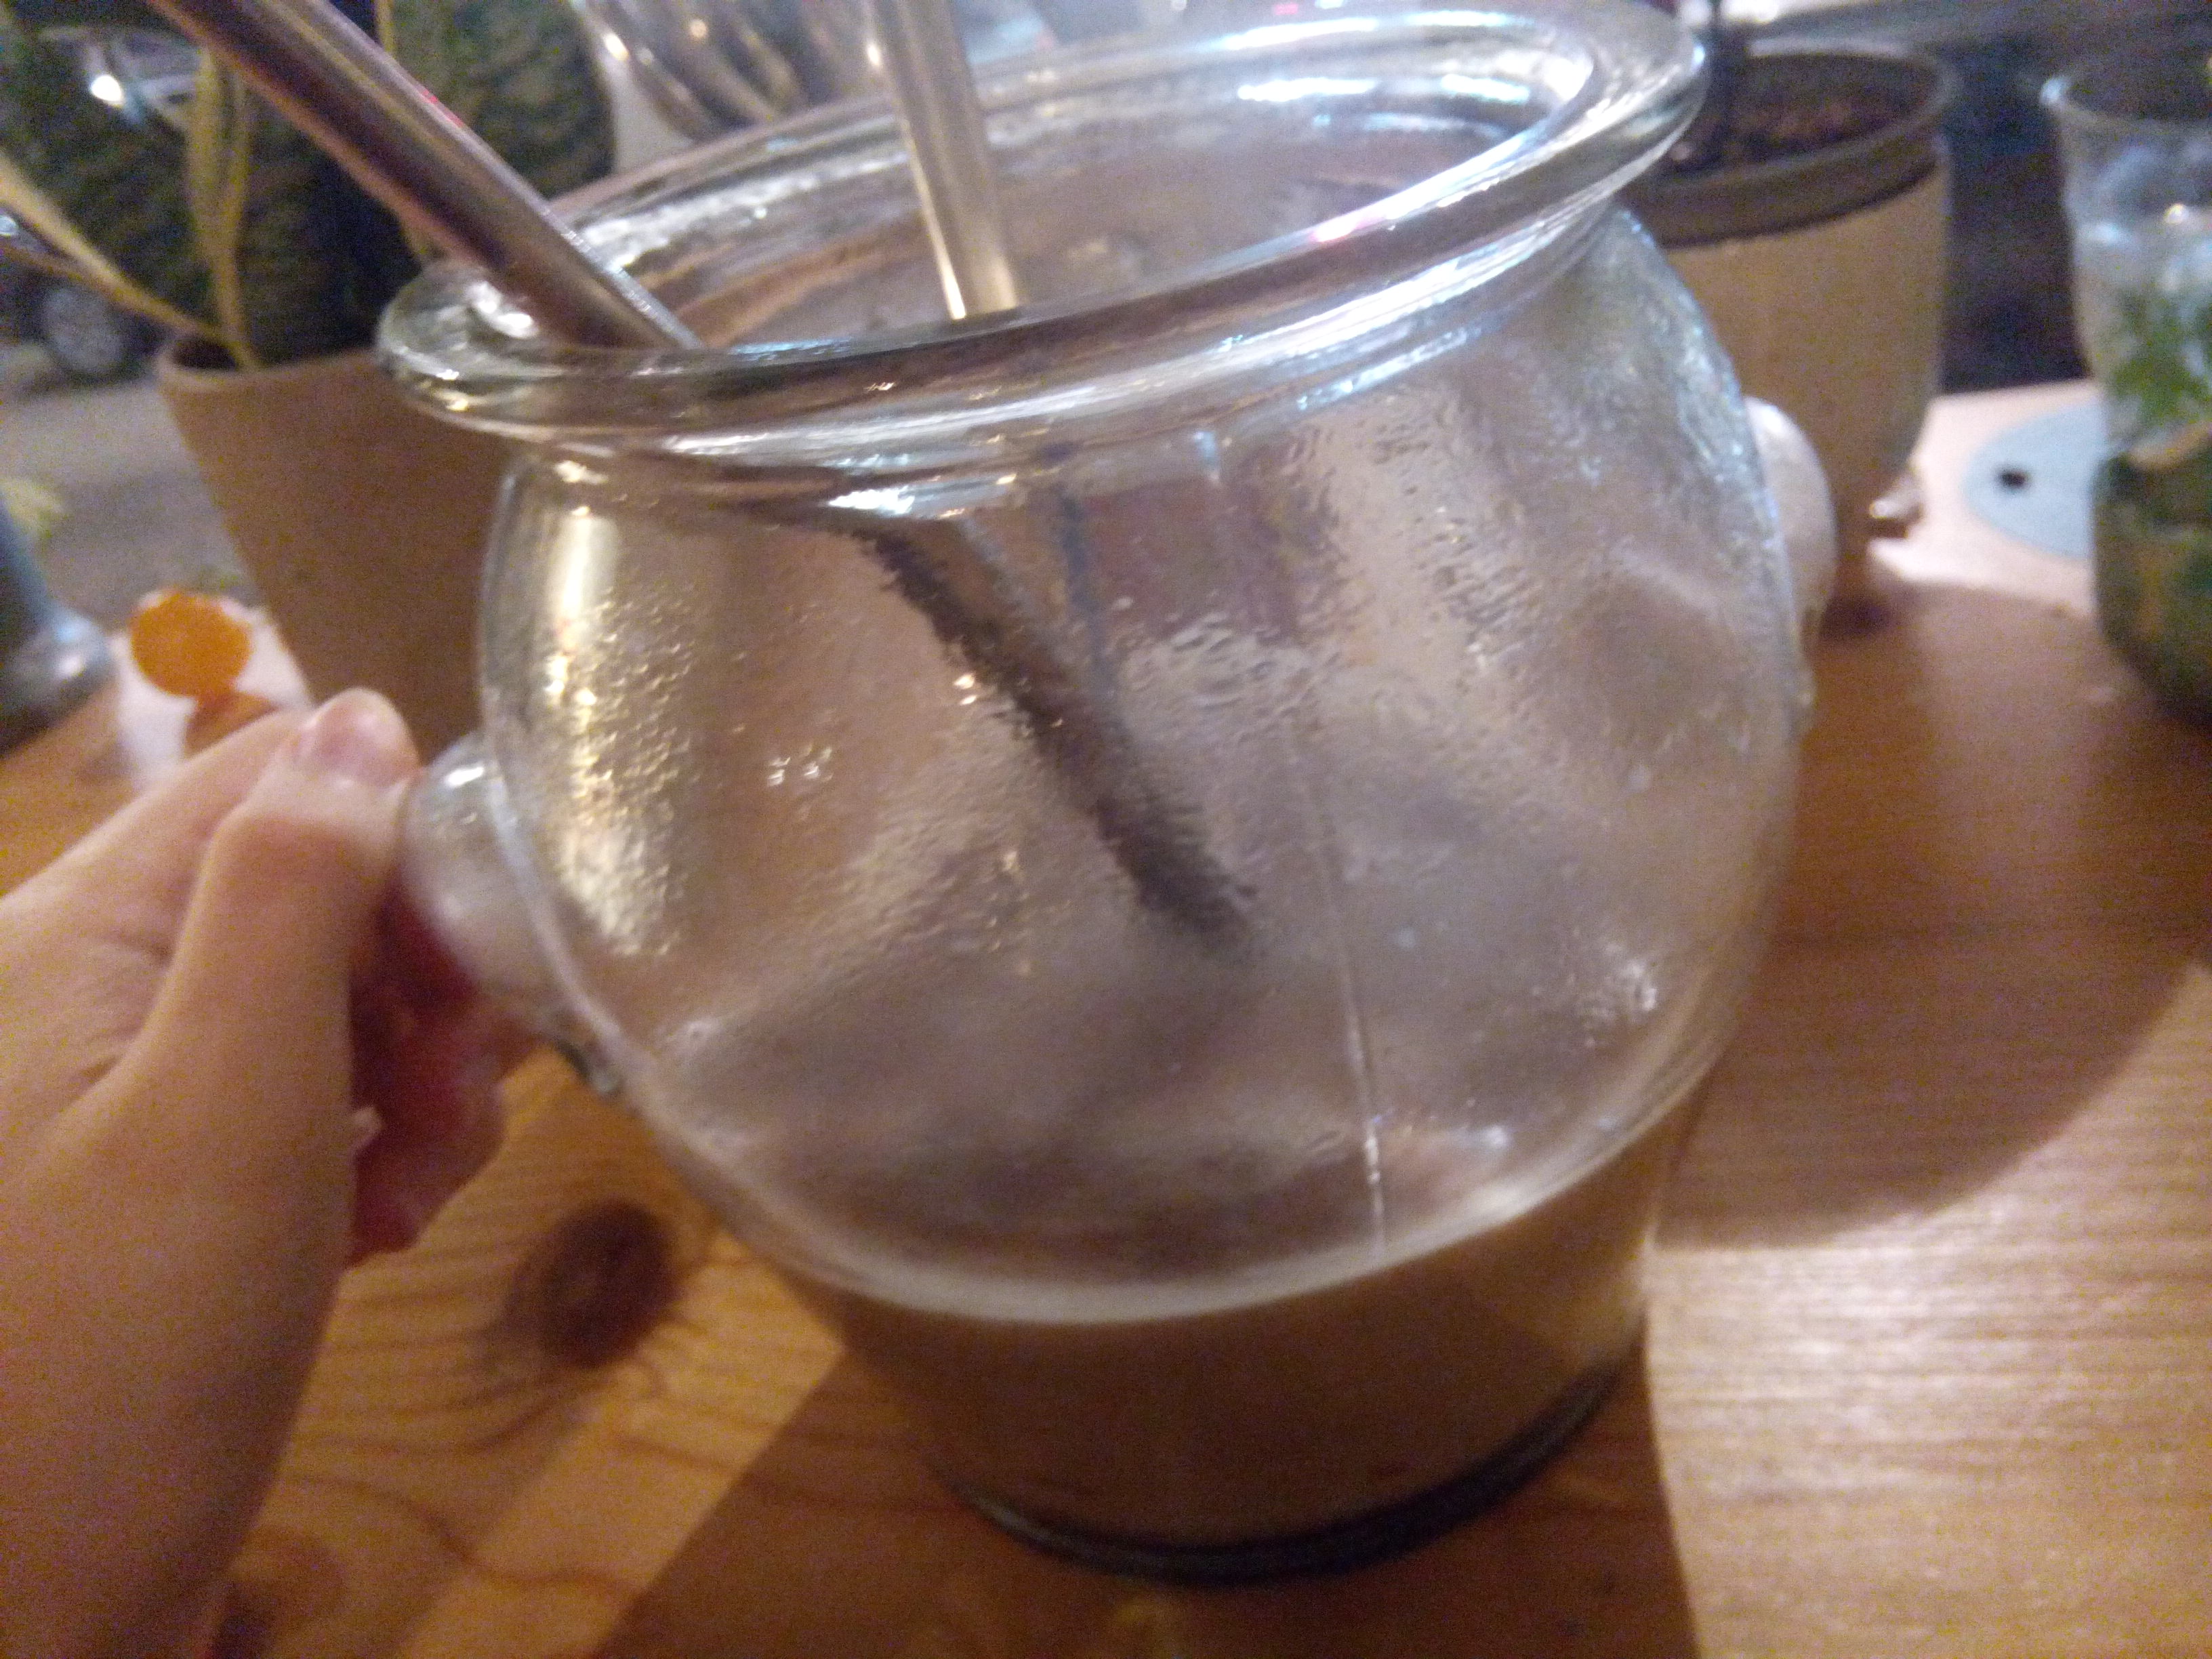 A hot chocolate served in a large vase with a metal straw